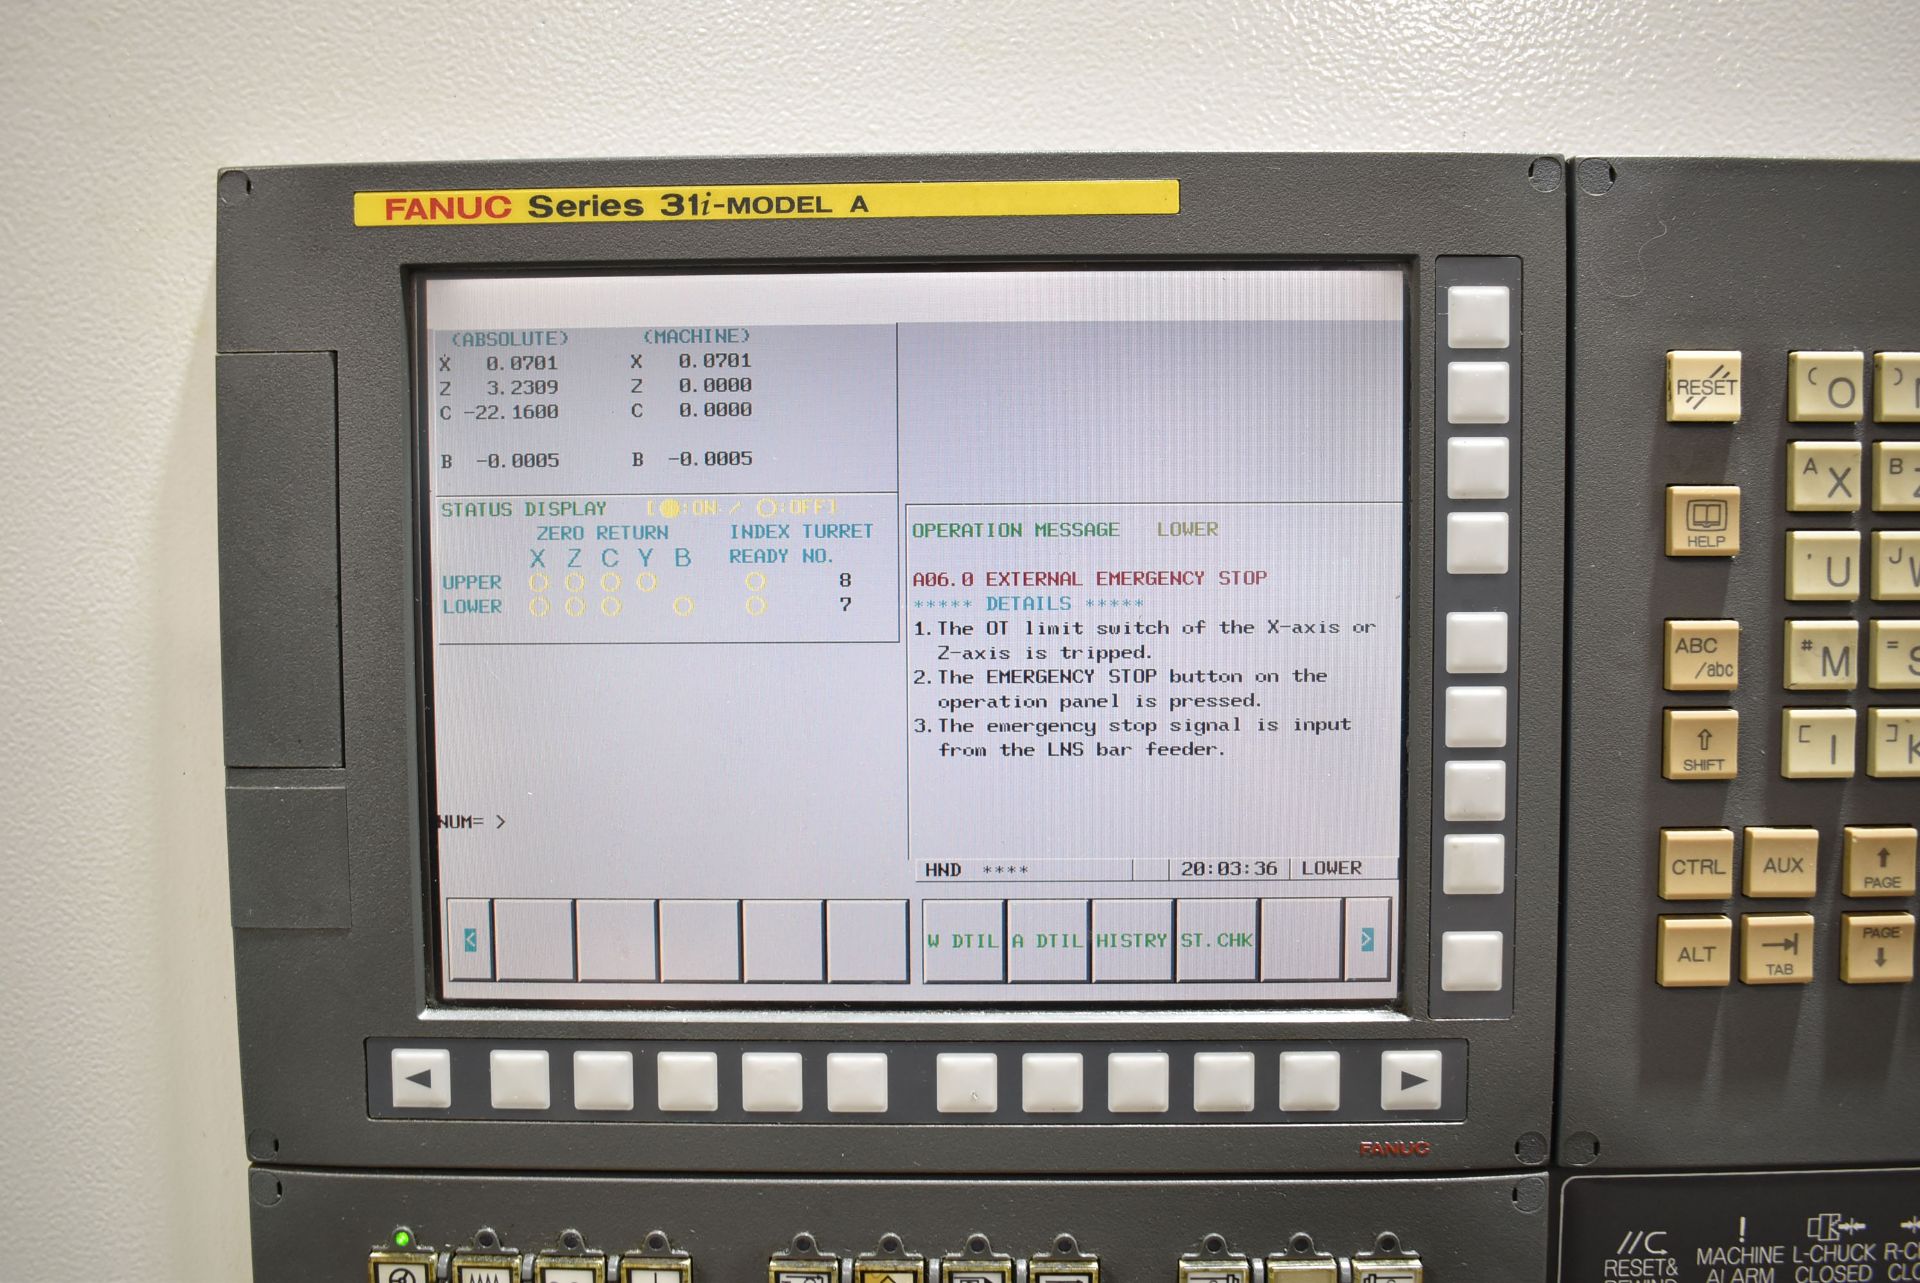 NAKAMURA-TOME WT-100 MULTI-AXIS OPPOSED SPINDLE AND TWIN TURRET CNC MULTI-TASKING CENTER WITH - Image 9 of 17